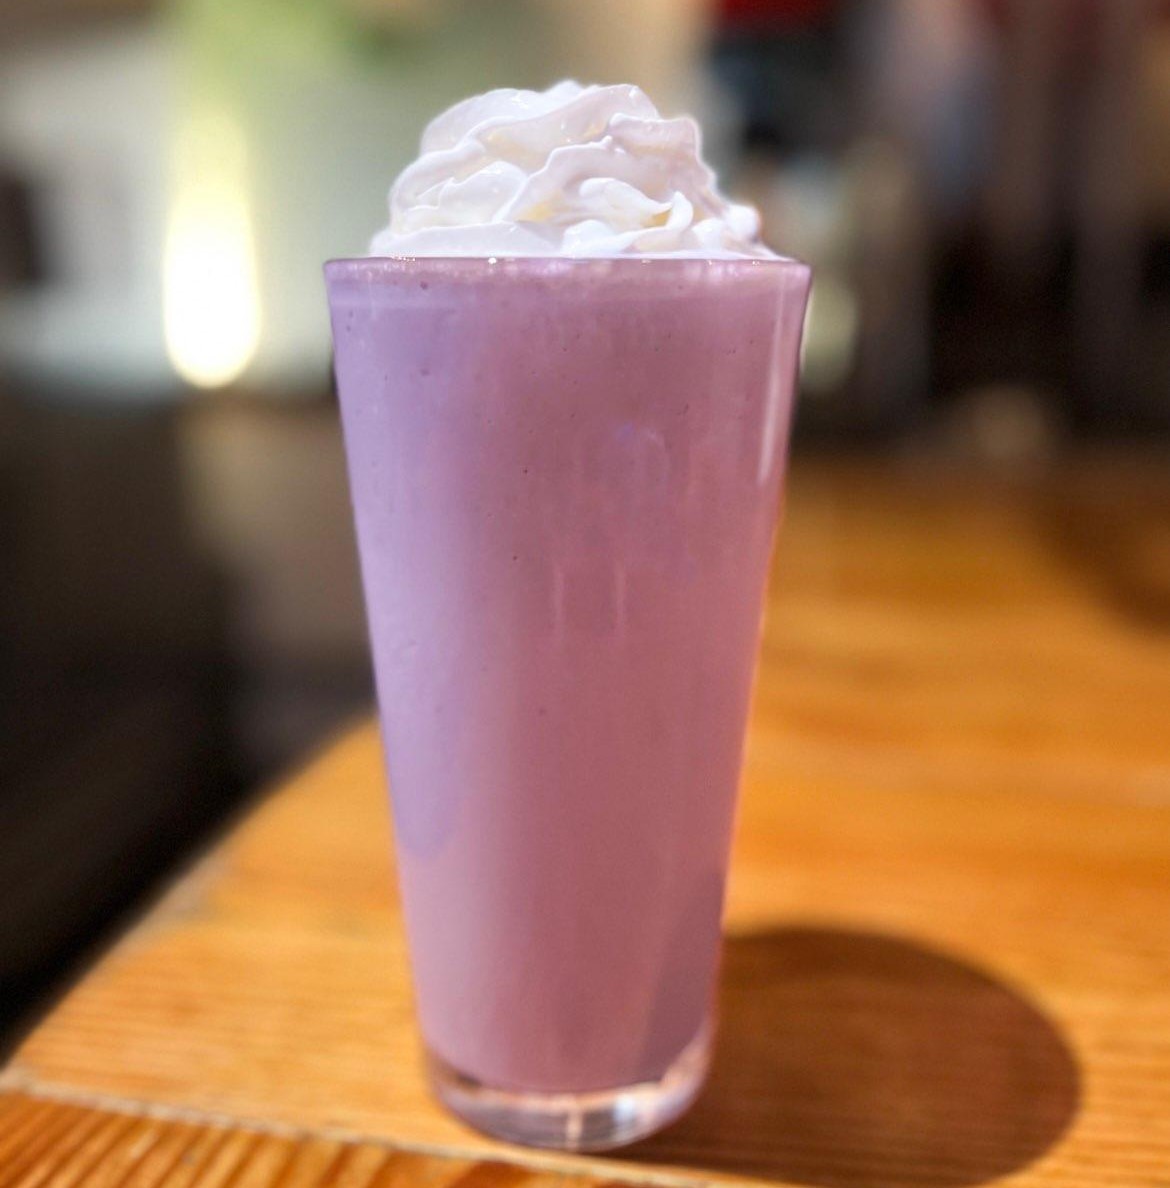 The Rustic Table Asian Kitchen | Taro Smoothie Blended Drink in Redding, California